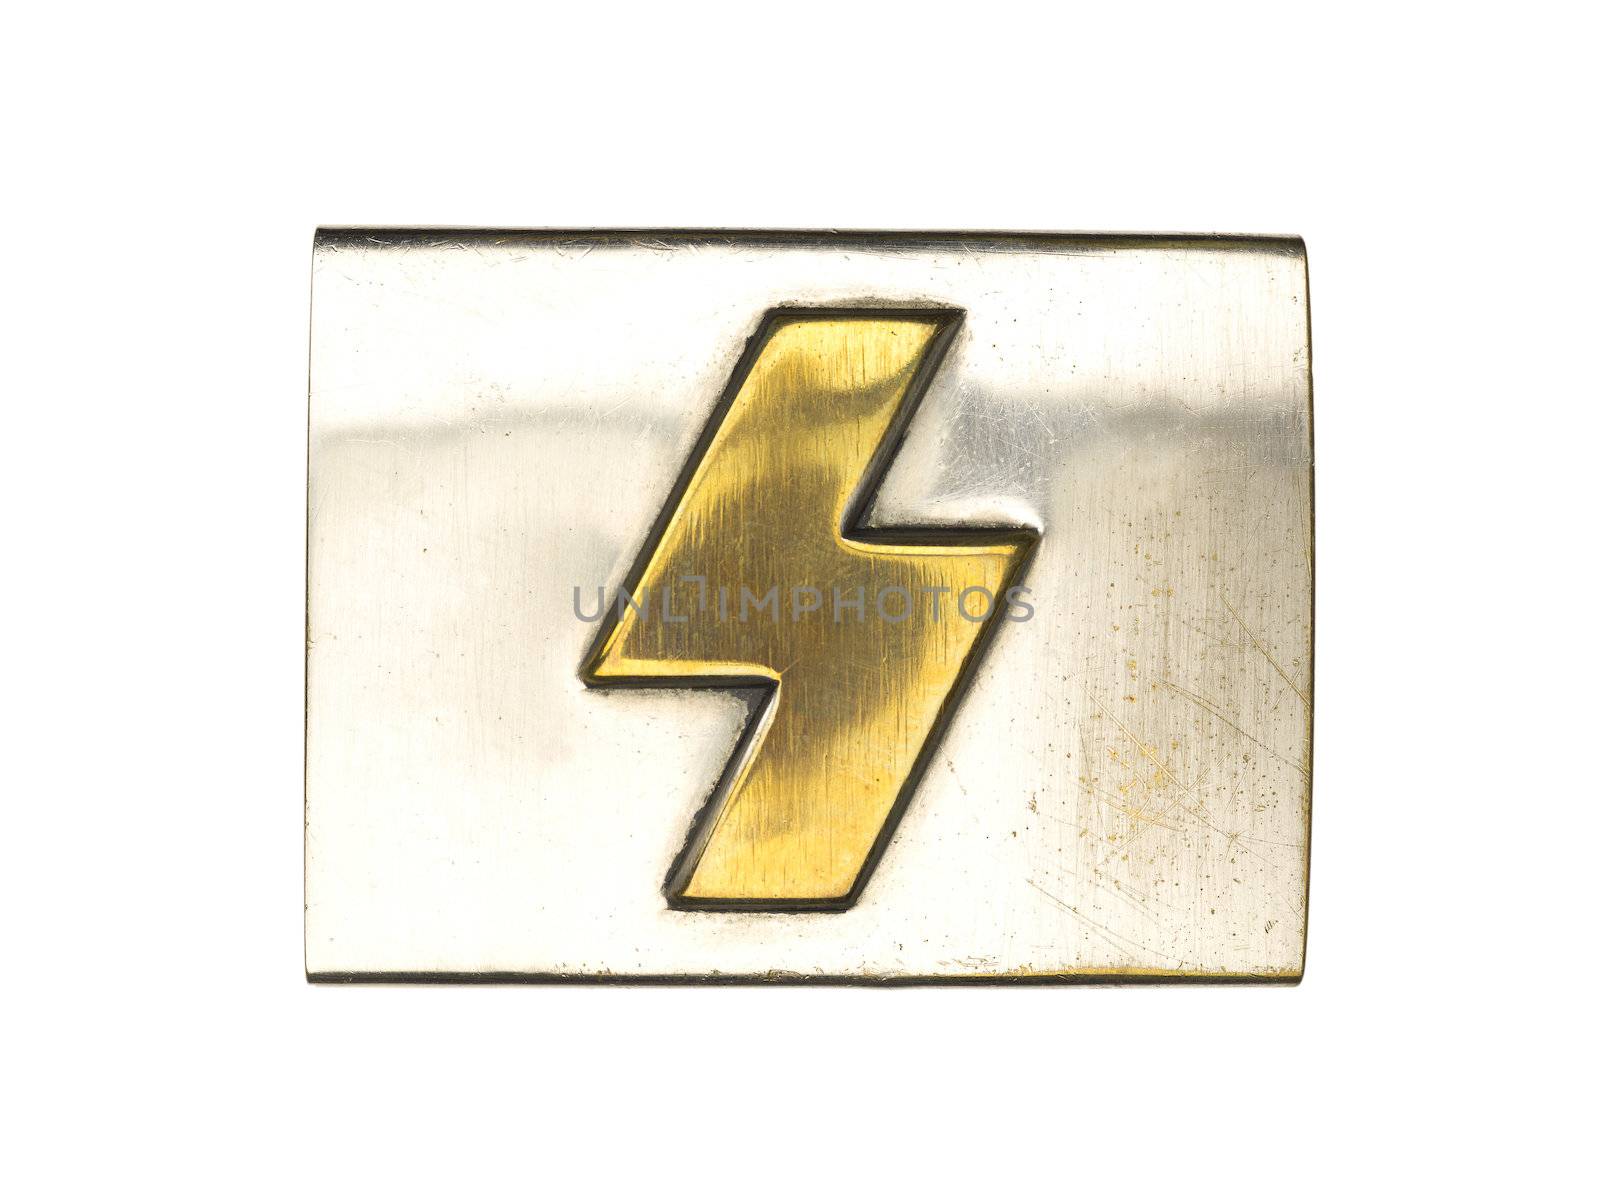 Close-up shot of a silver German belt buckle with a golden sign on it.